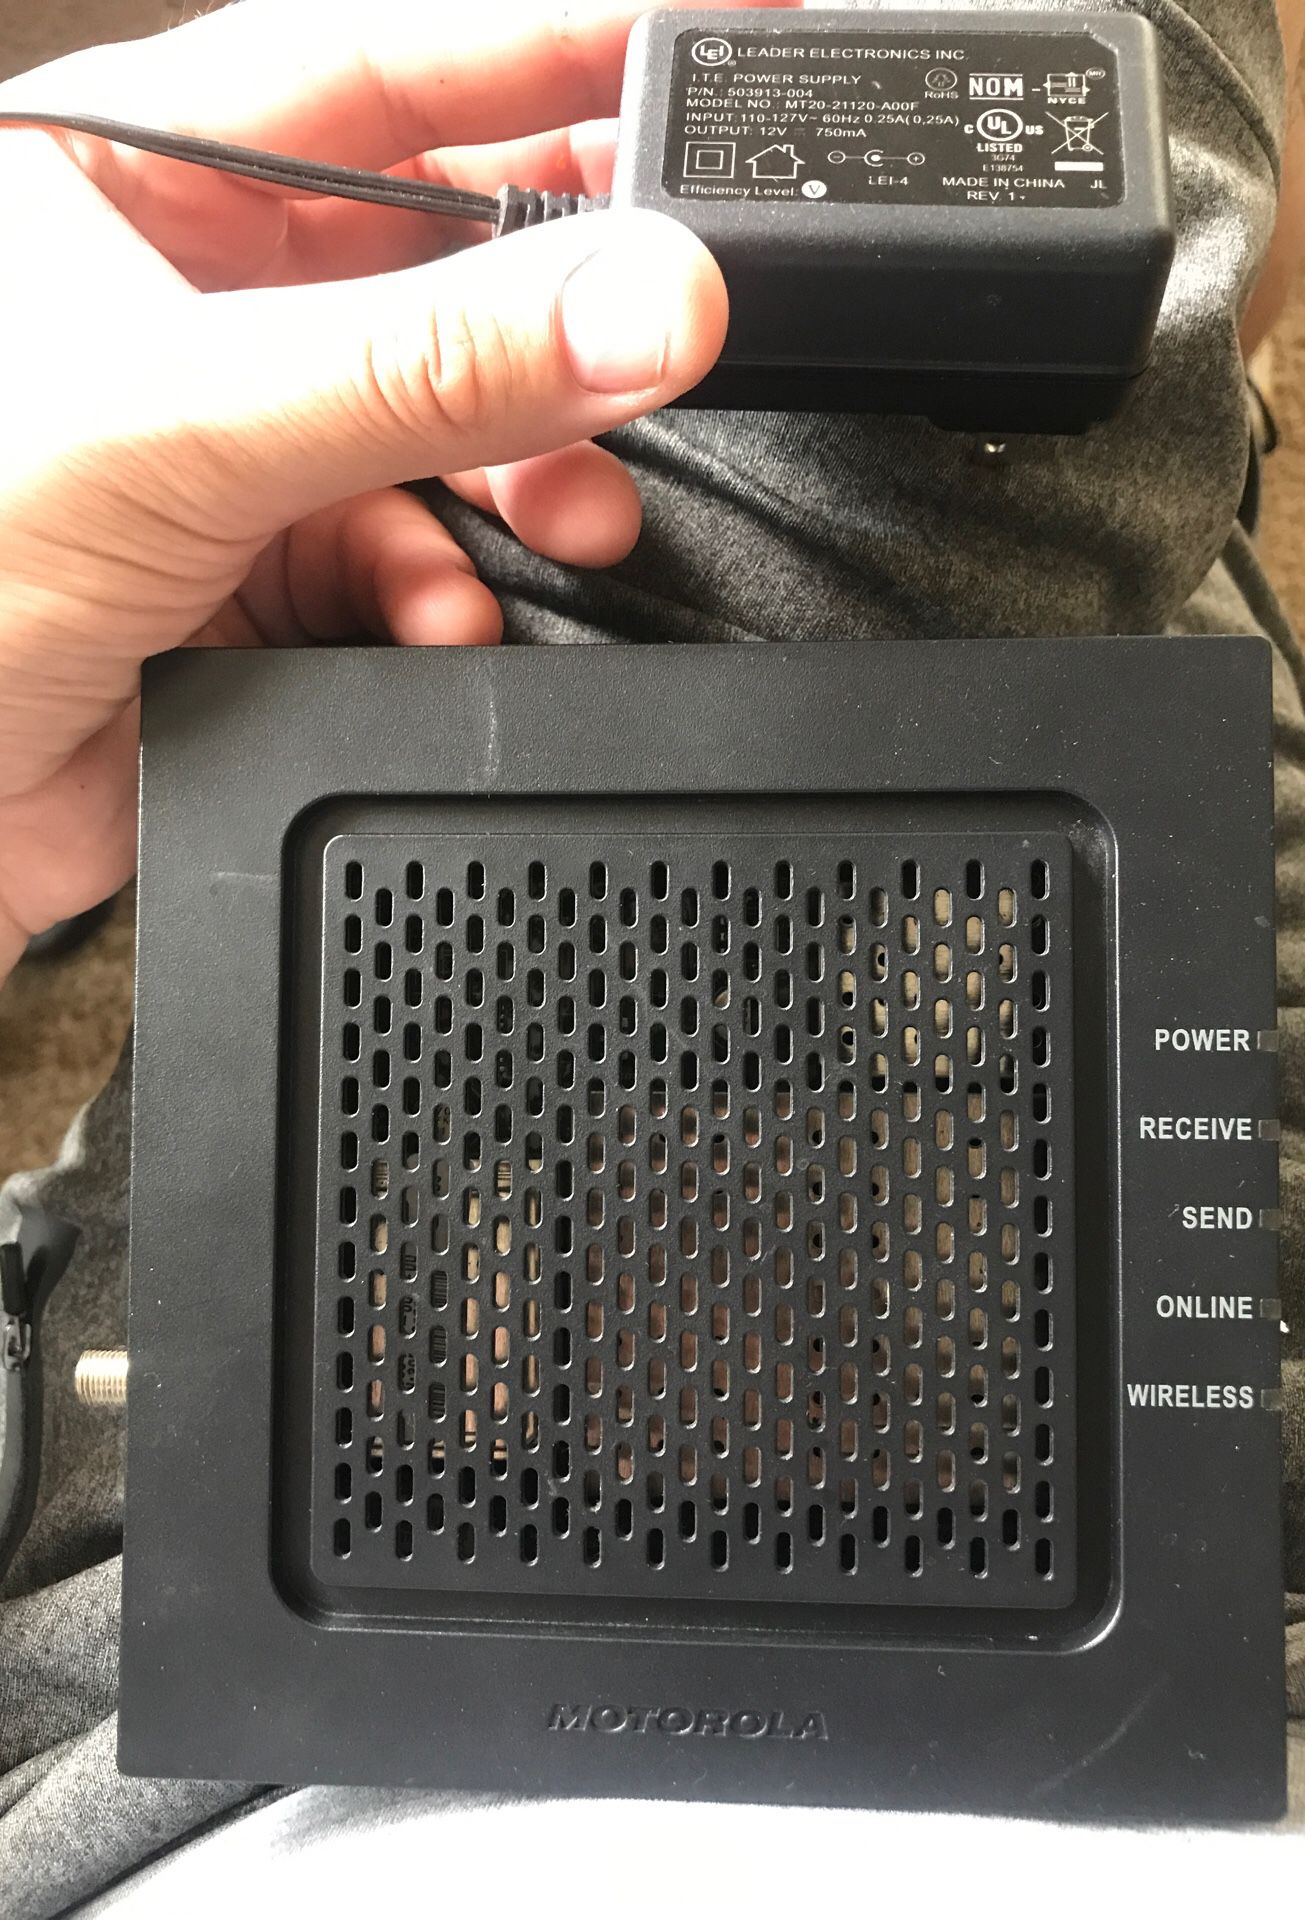 Motorola cable modem/router, used it with Xfinity and works really well, no issues with it at all it is in used condition hence the reason I am only